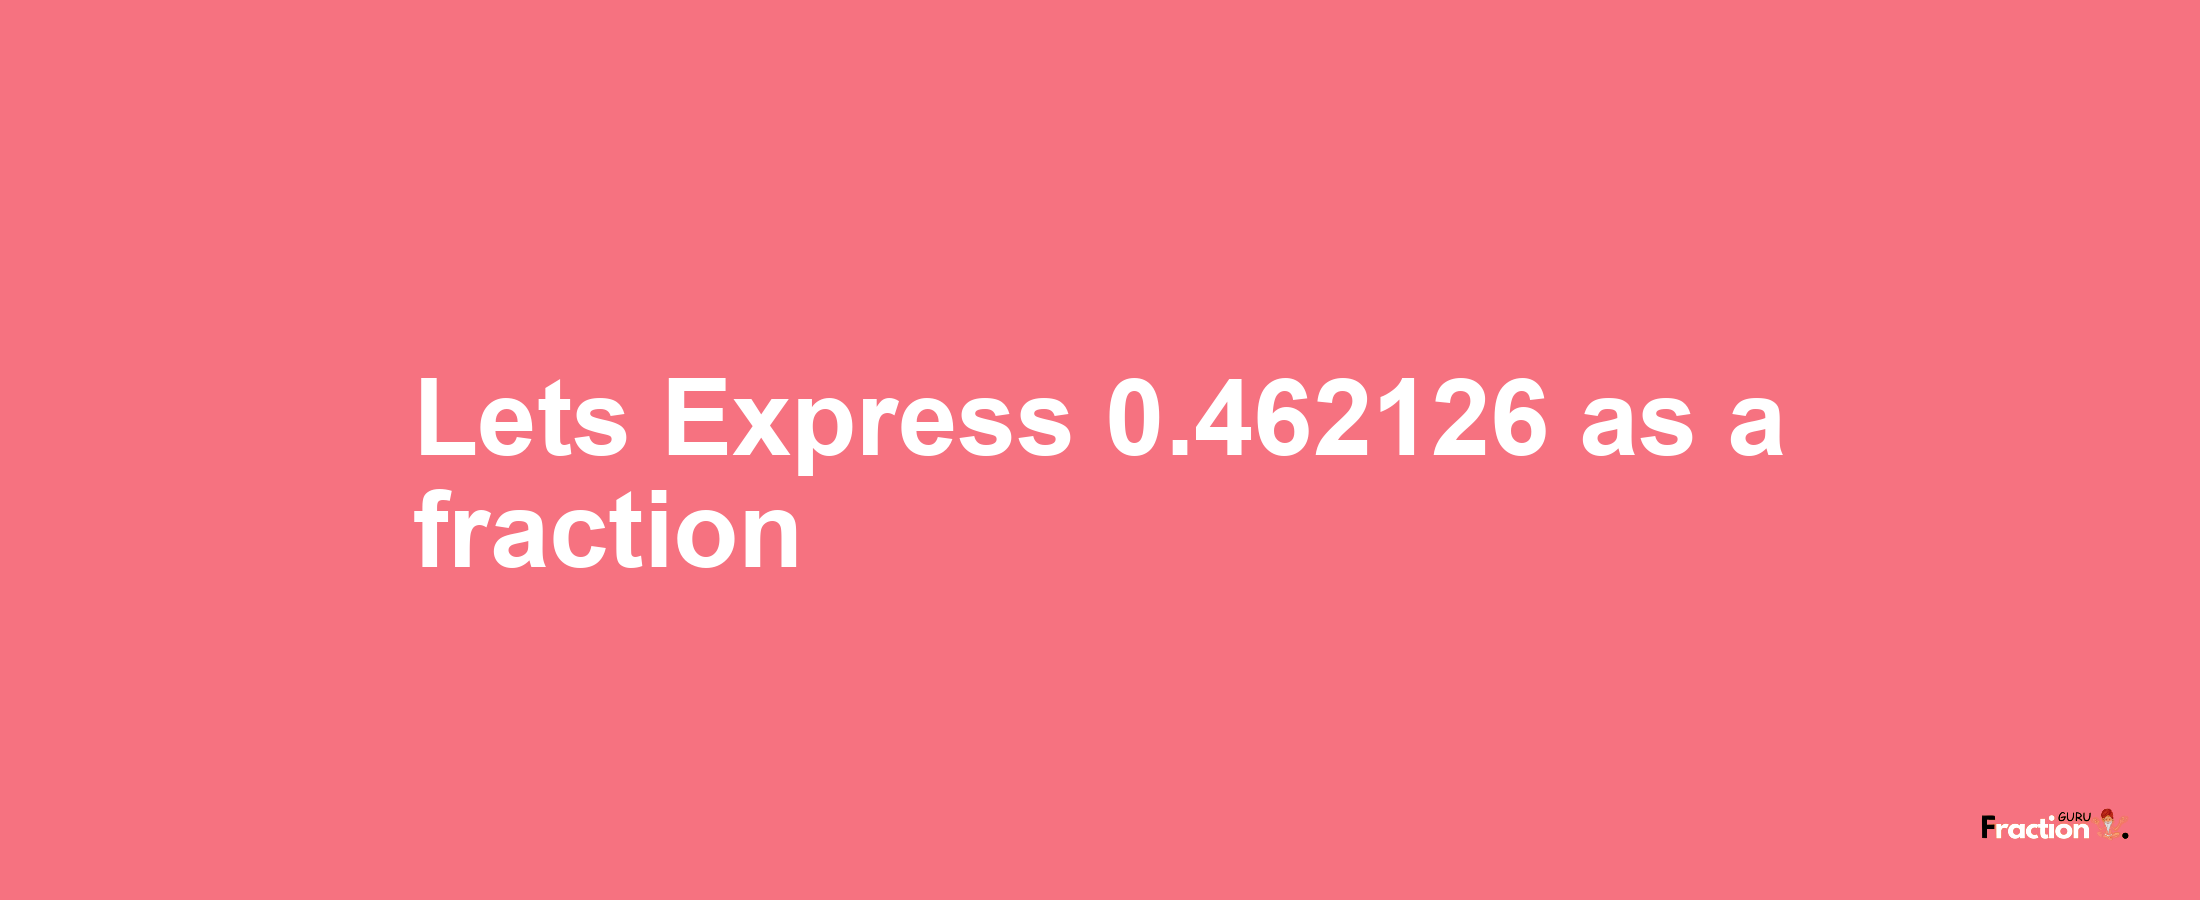 Lets Express 0.462126 as afraction